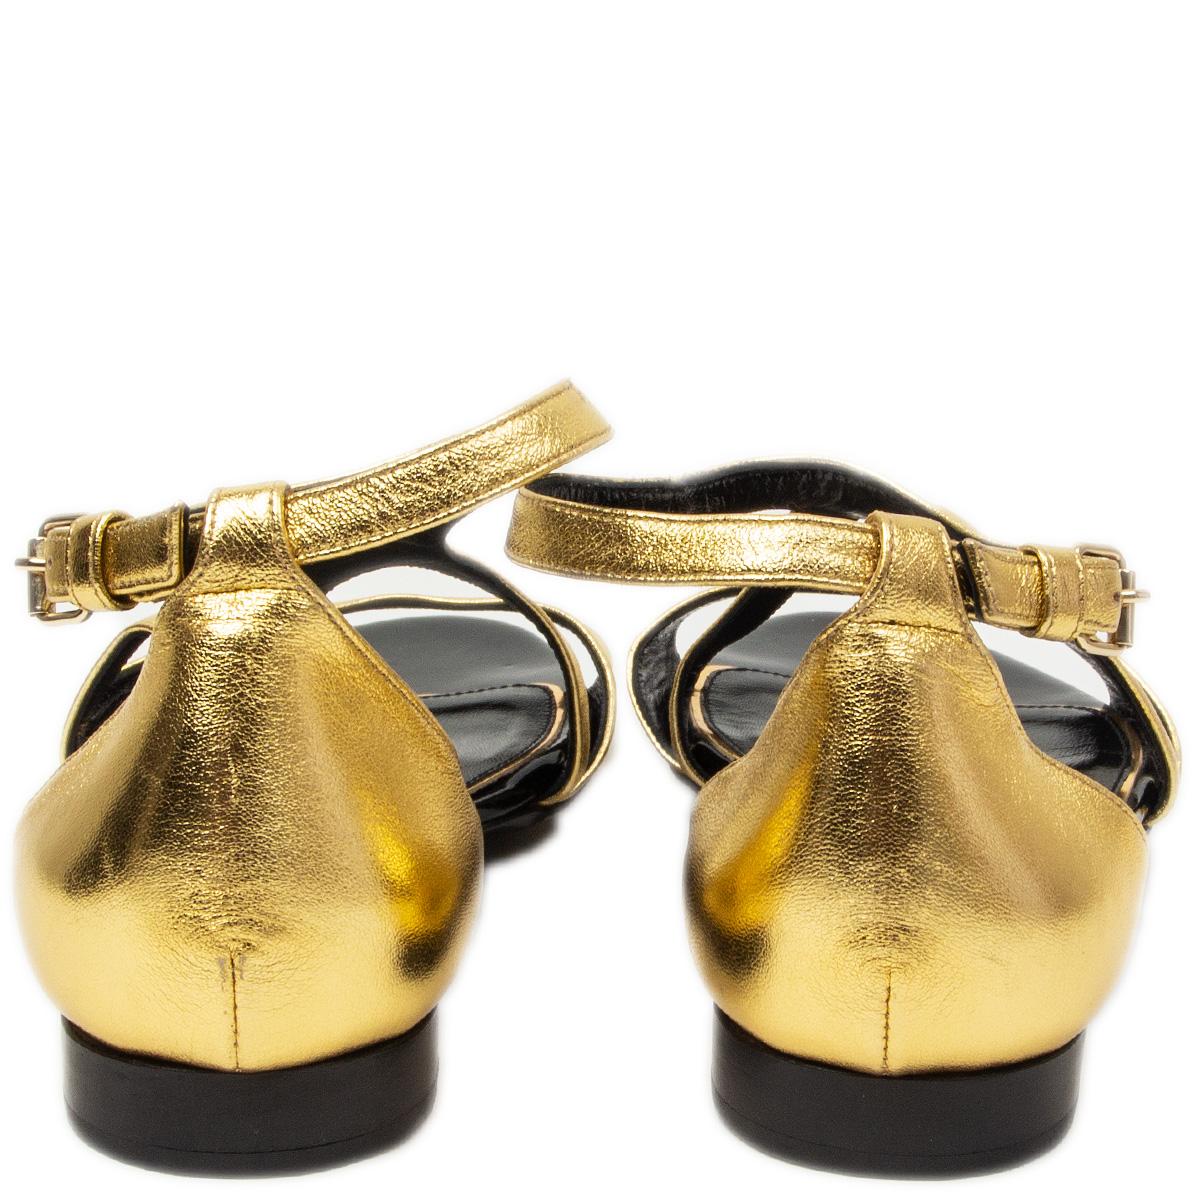 LANVIN gold leather Strap Sandals Shoes 39 In Excellent Condition For Sale In Zürich, CH